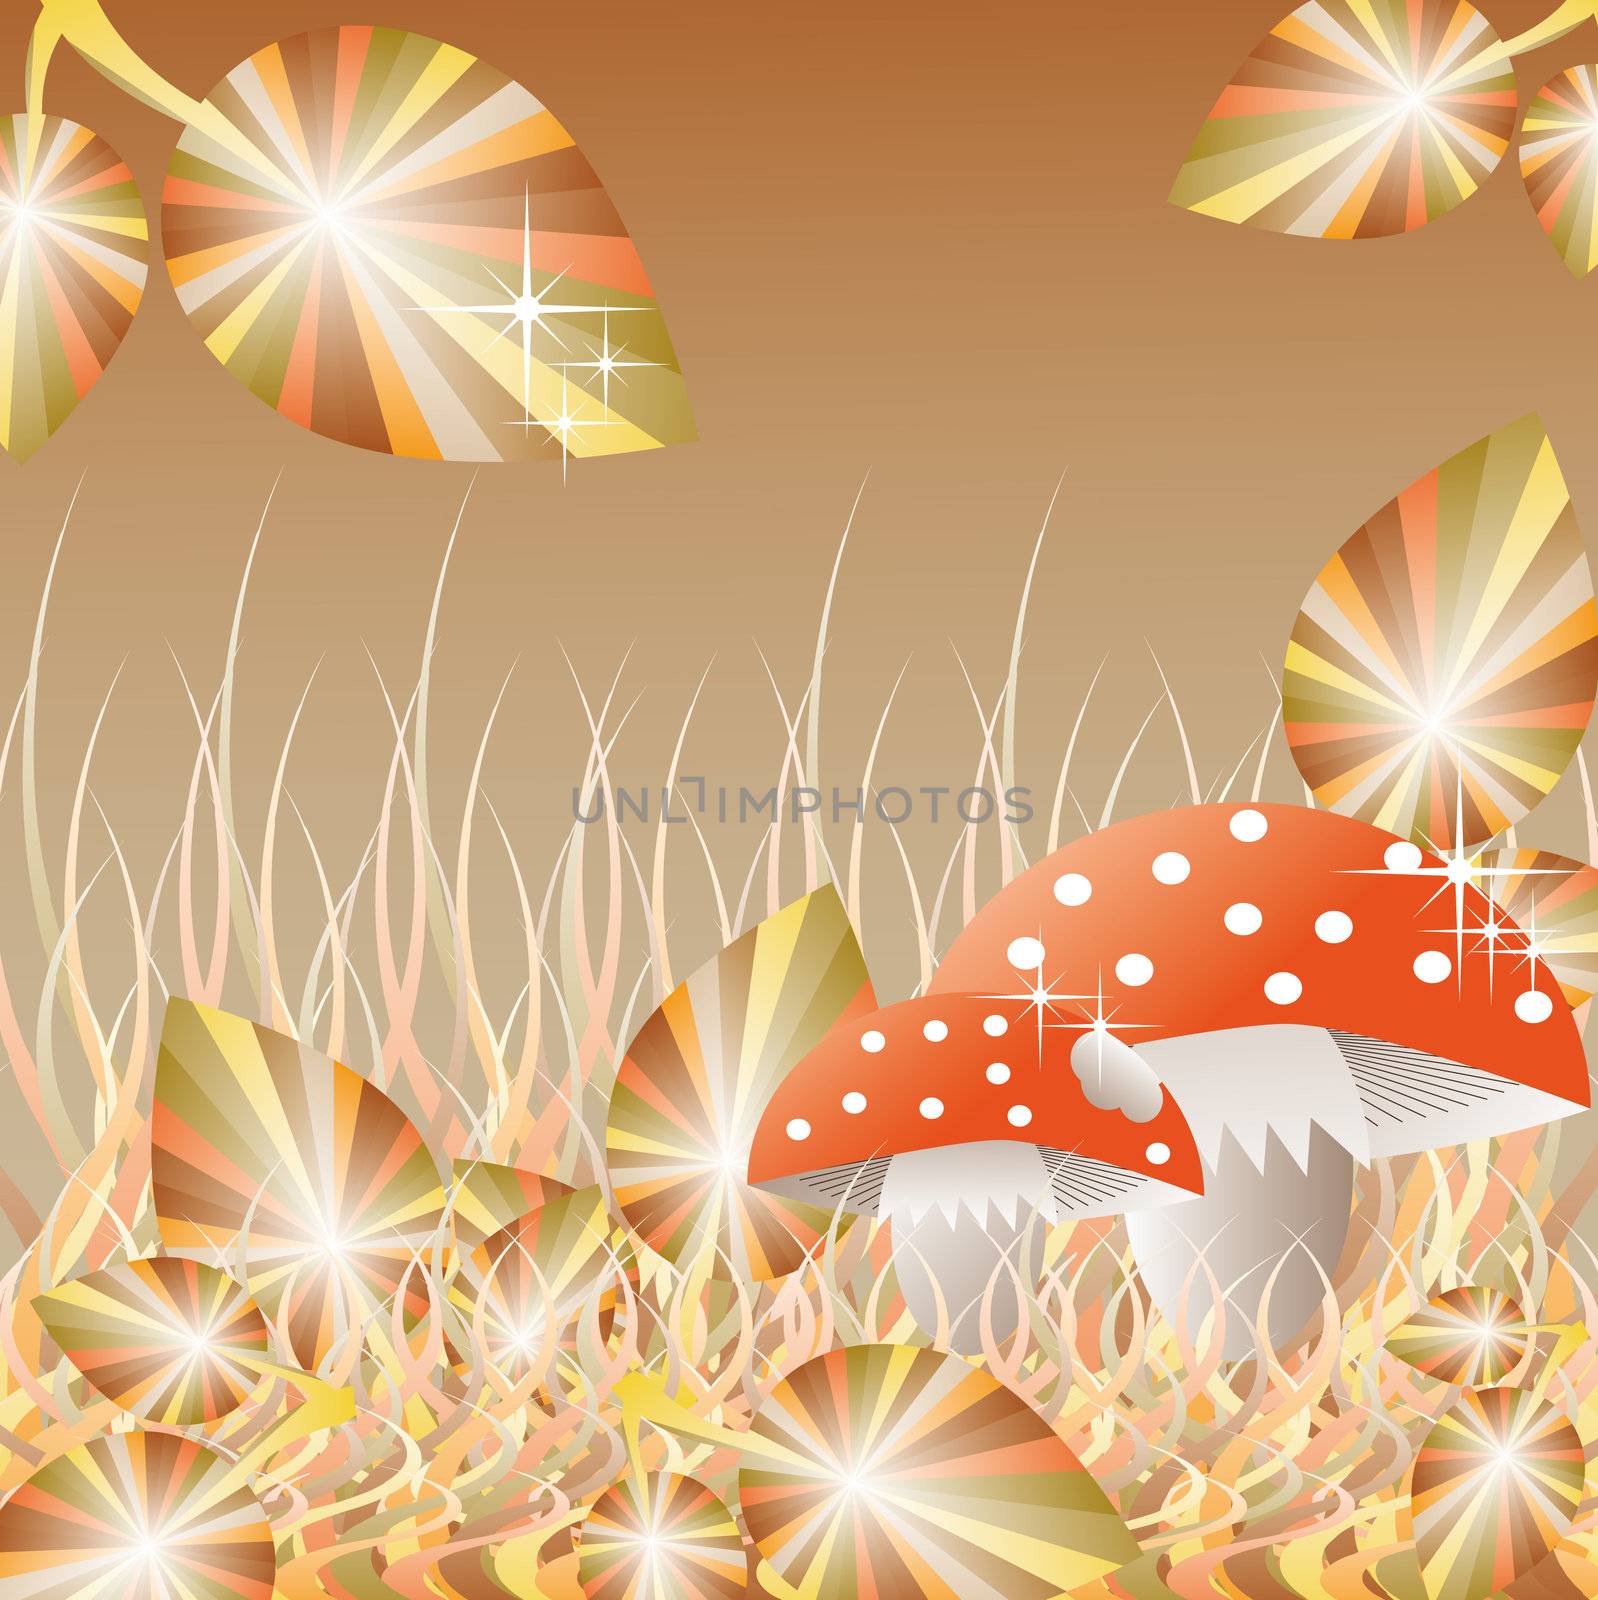 mushrooms in the forest by karinclaus